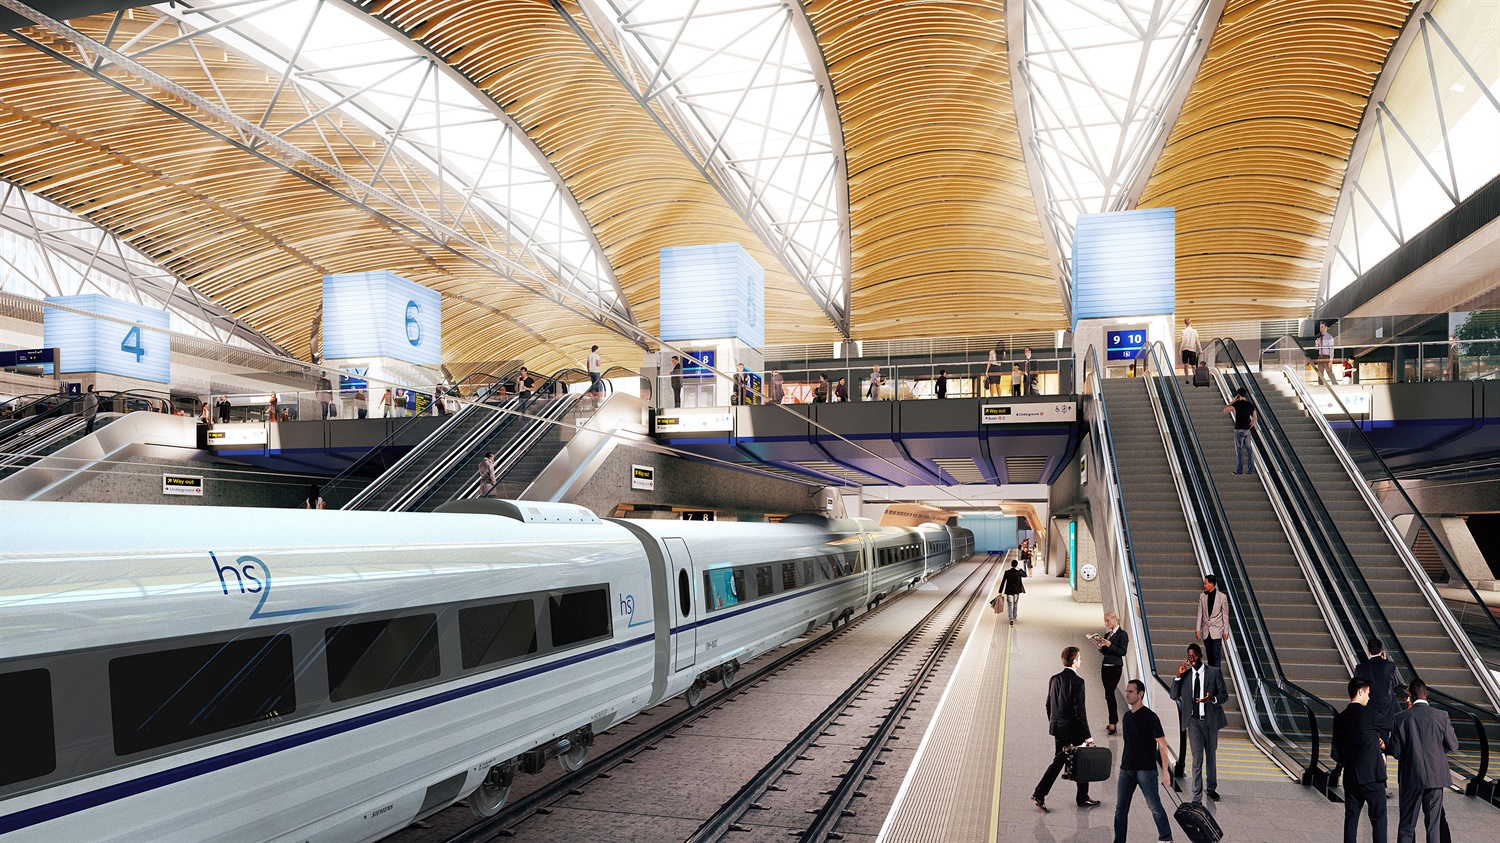 Stations, civils, trains and NPR links: HS2 lays out key milestones for year ahead